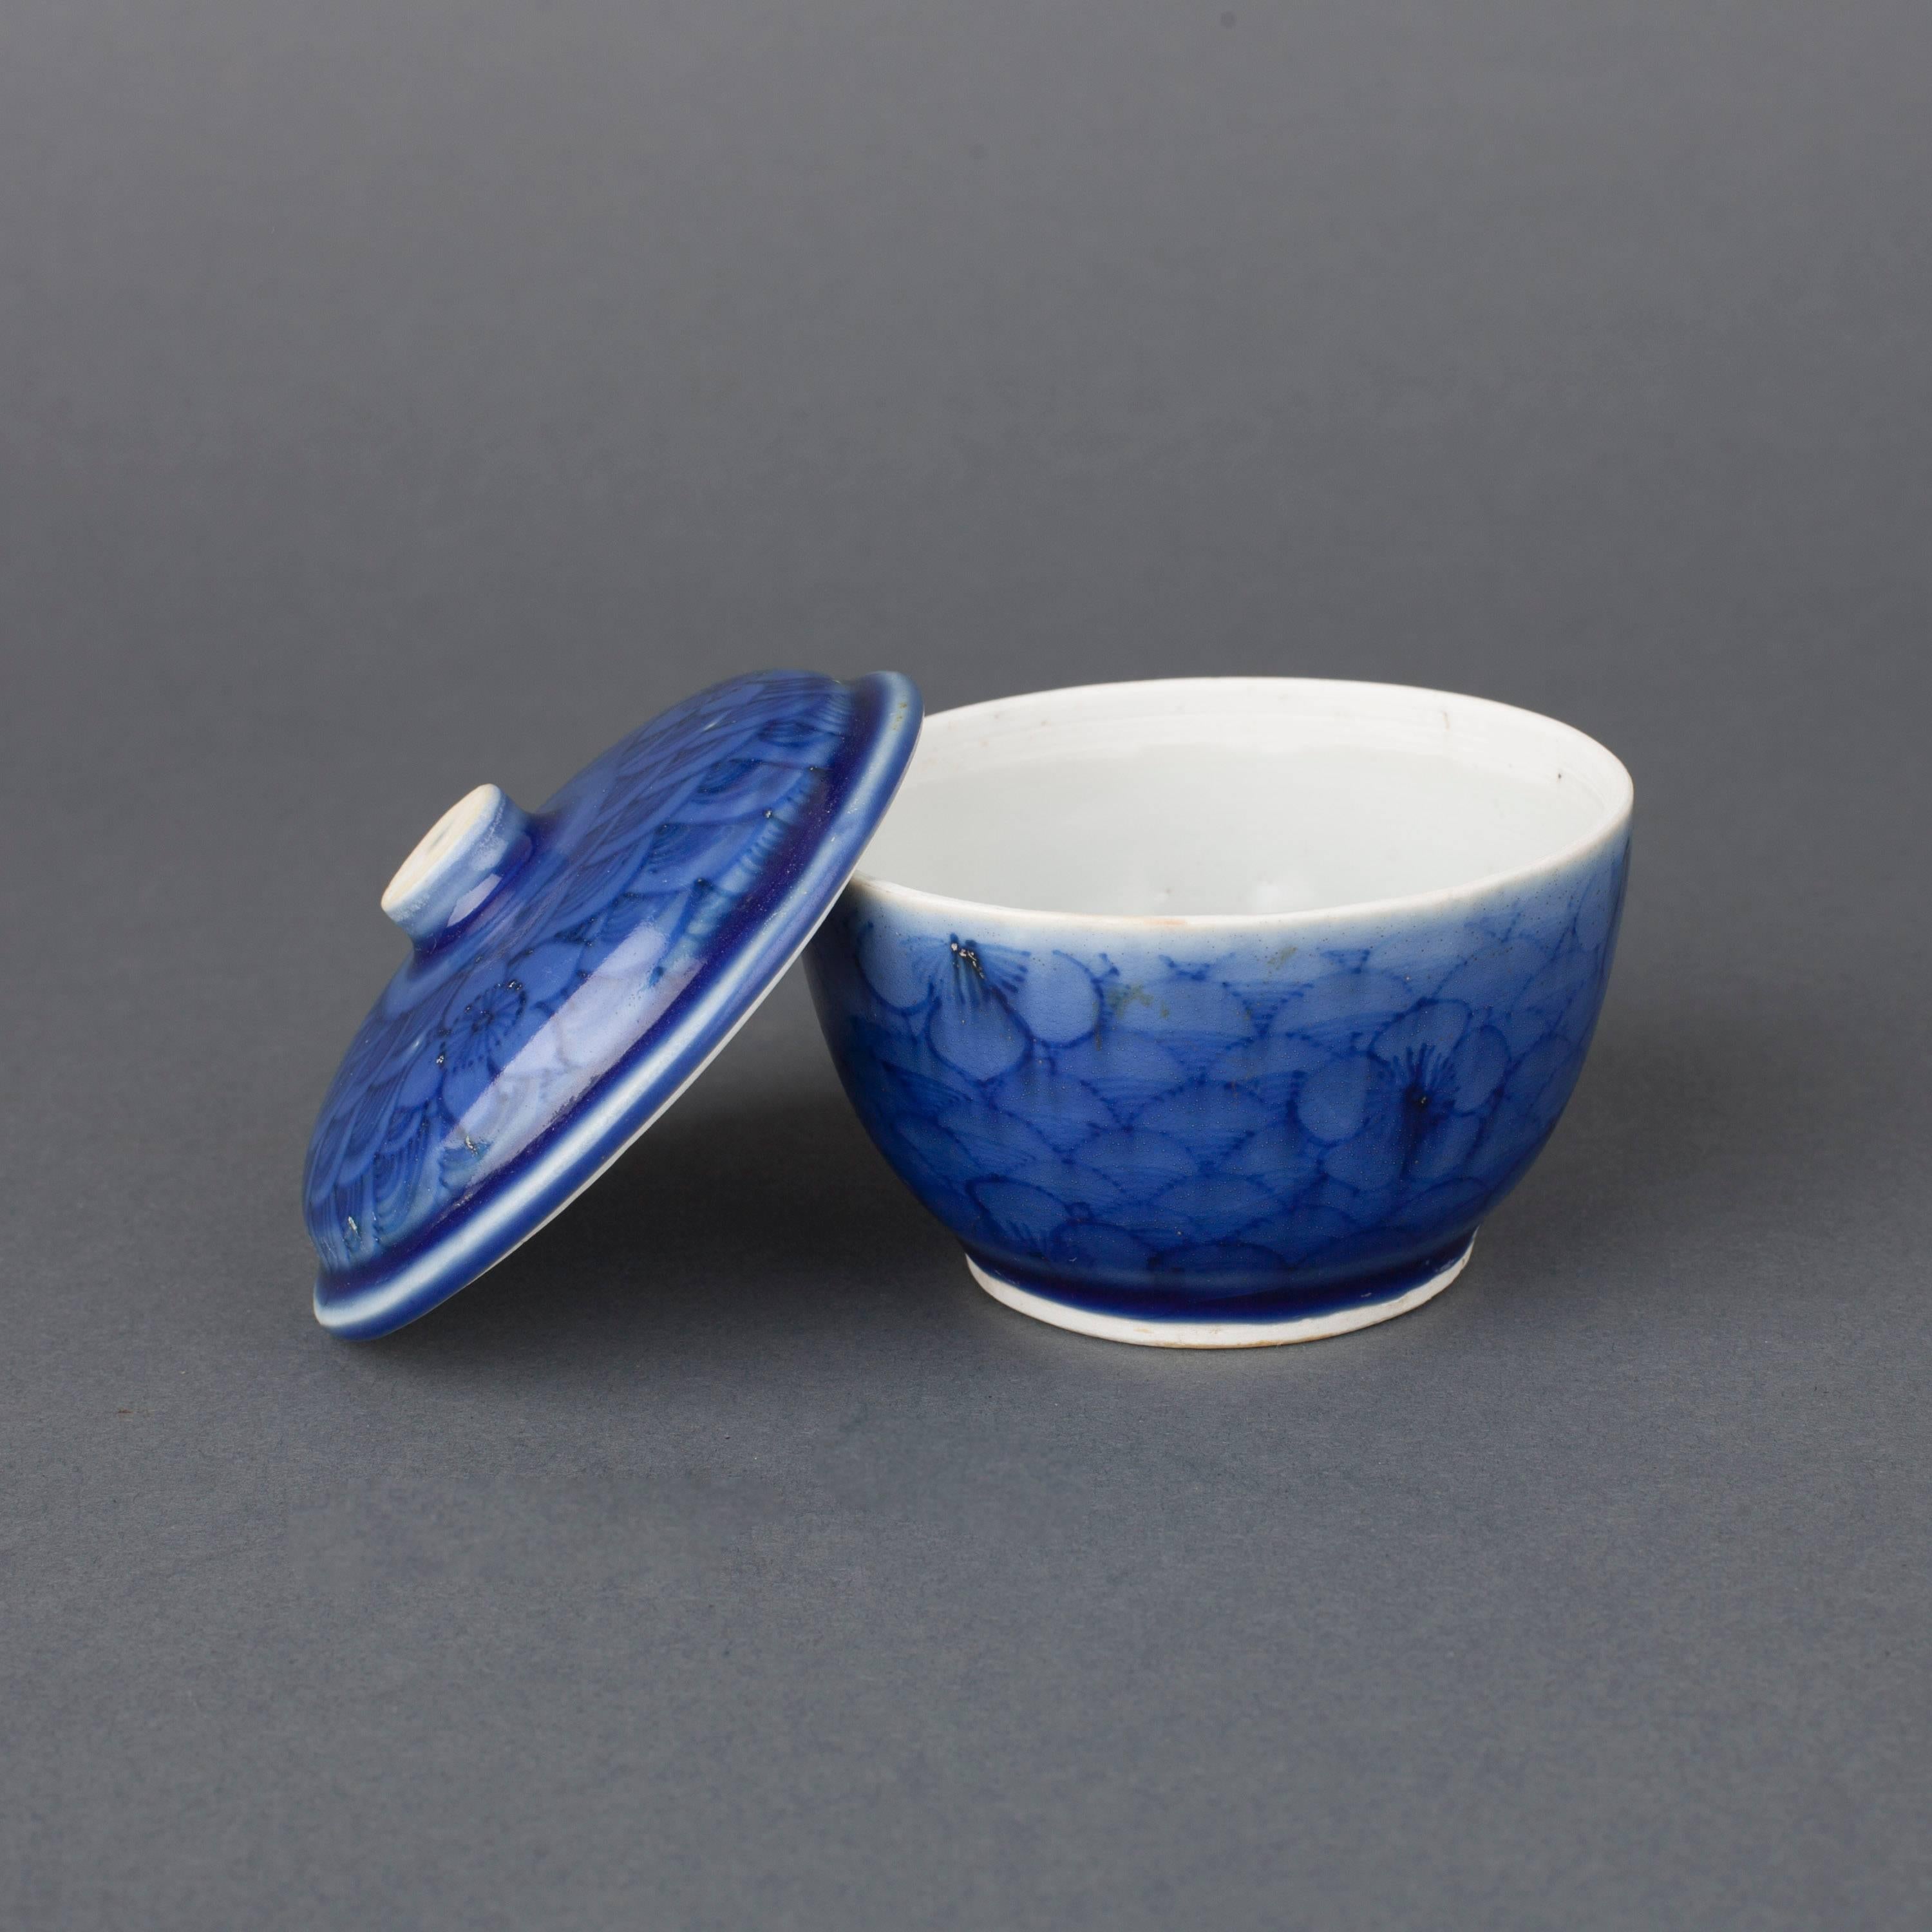 Qing Chinese Porcelain Blue Glaze Bowl and Cover, 17th Century For Sale